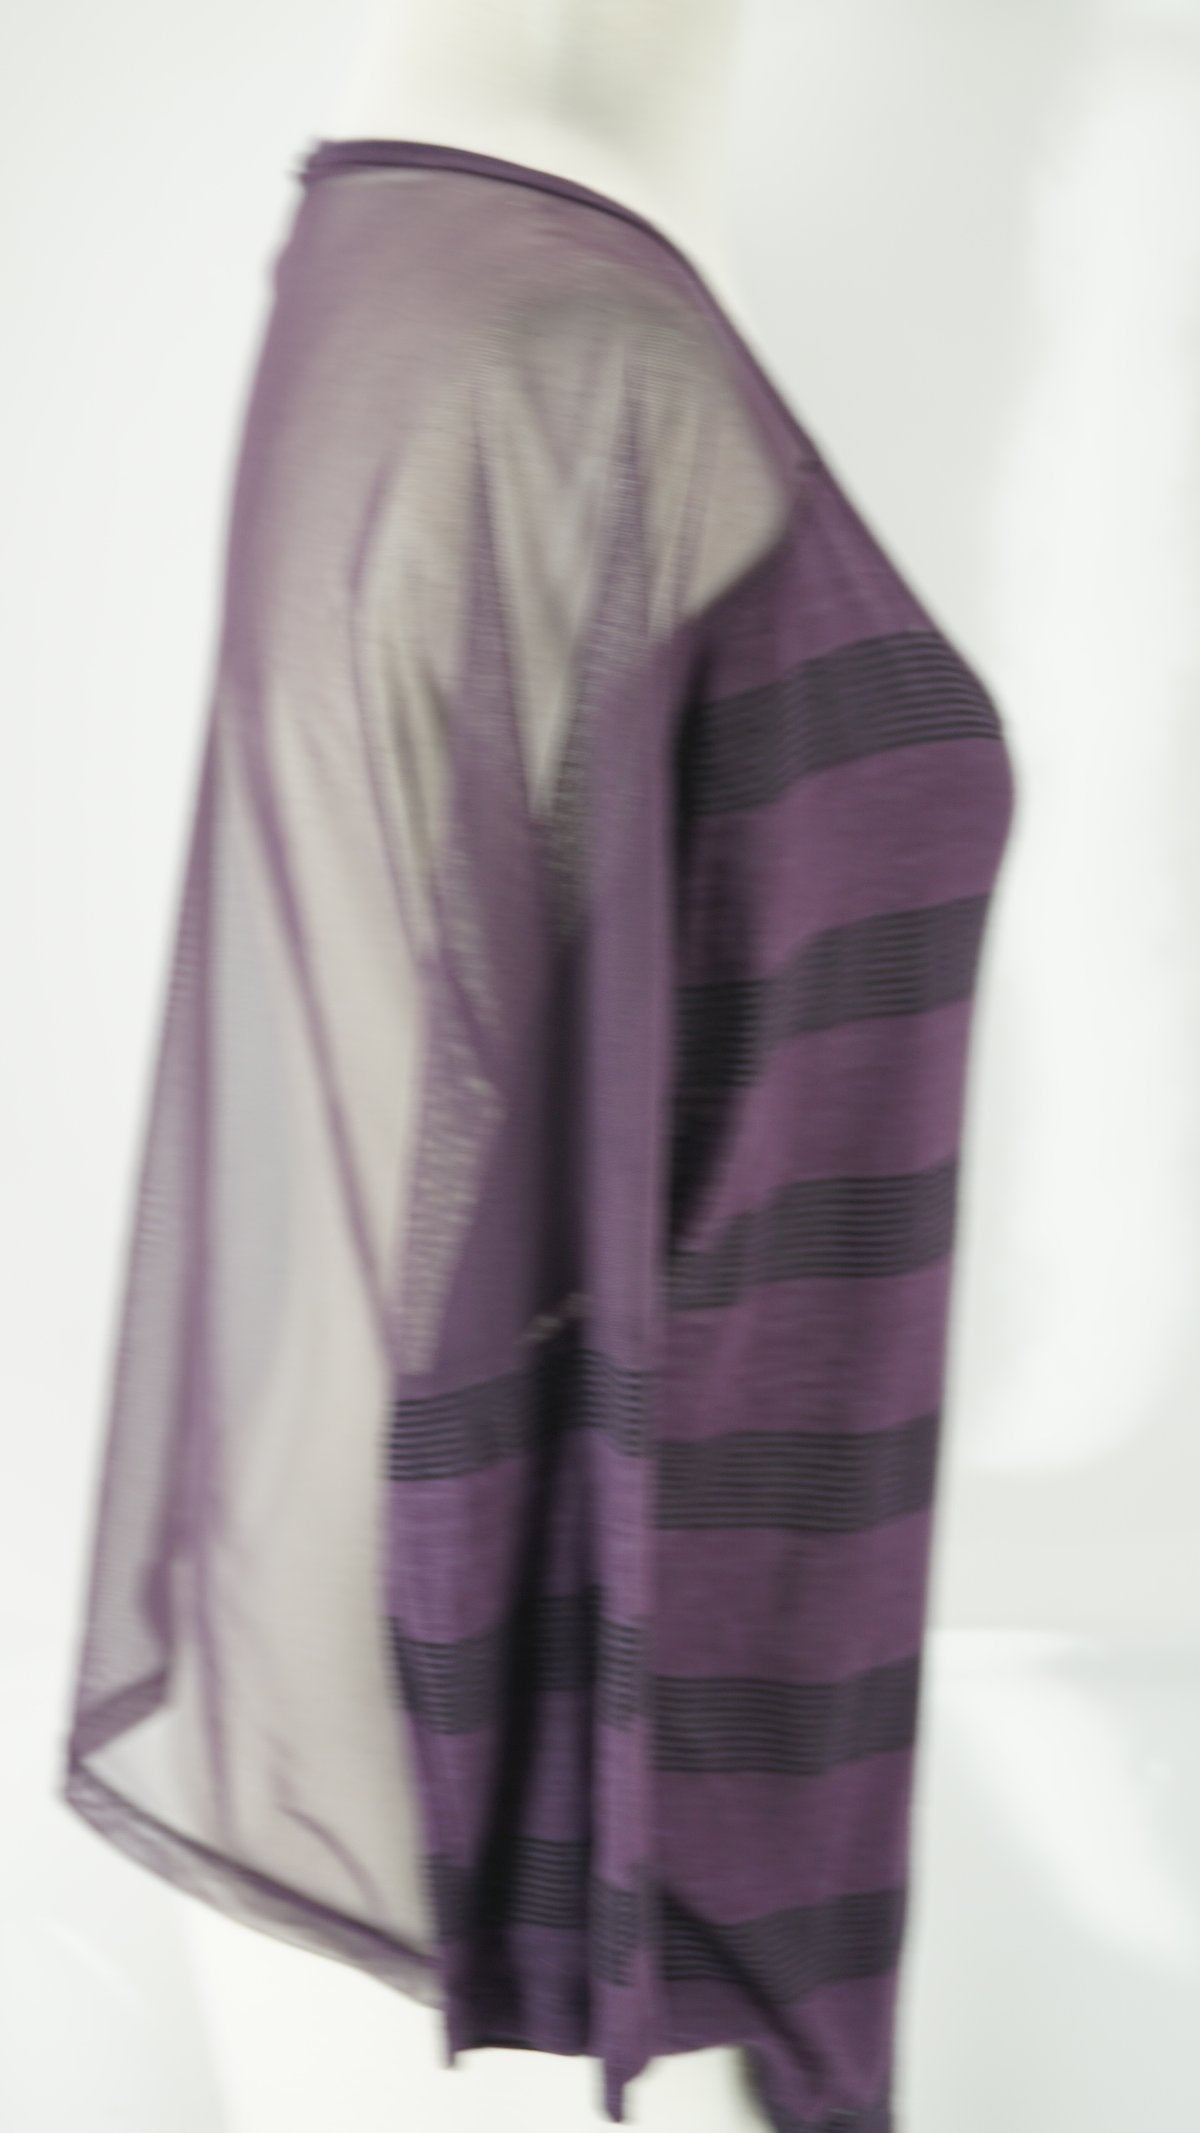 Love On A Hanger Striped T Shirt Sheer Back Blouse SZ Small Purple $32 Nordstrom